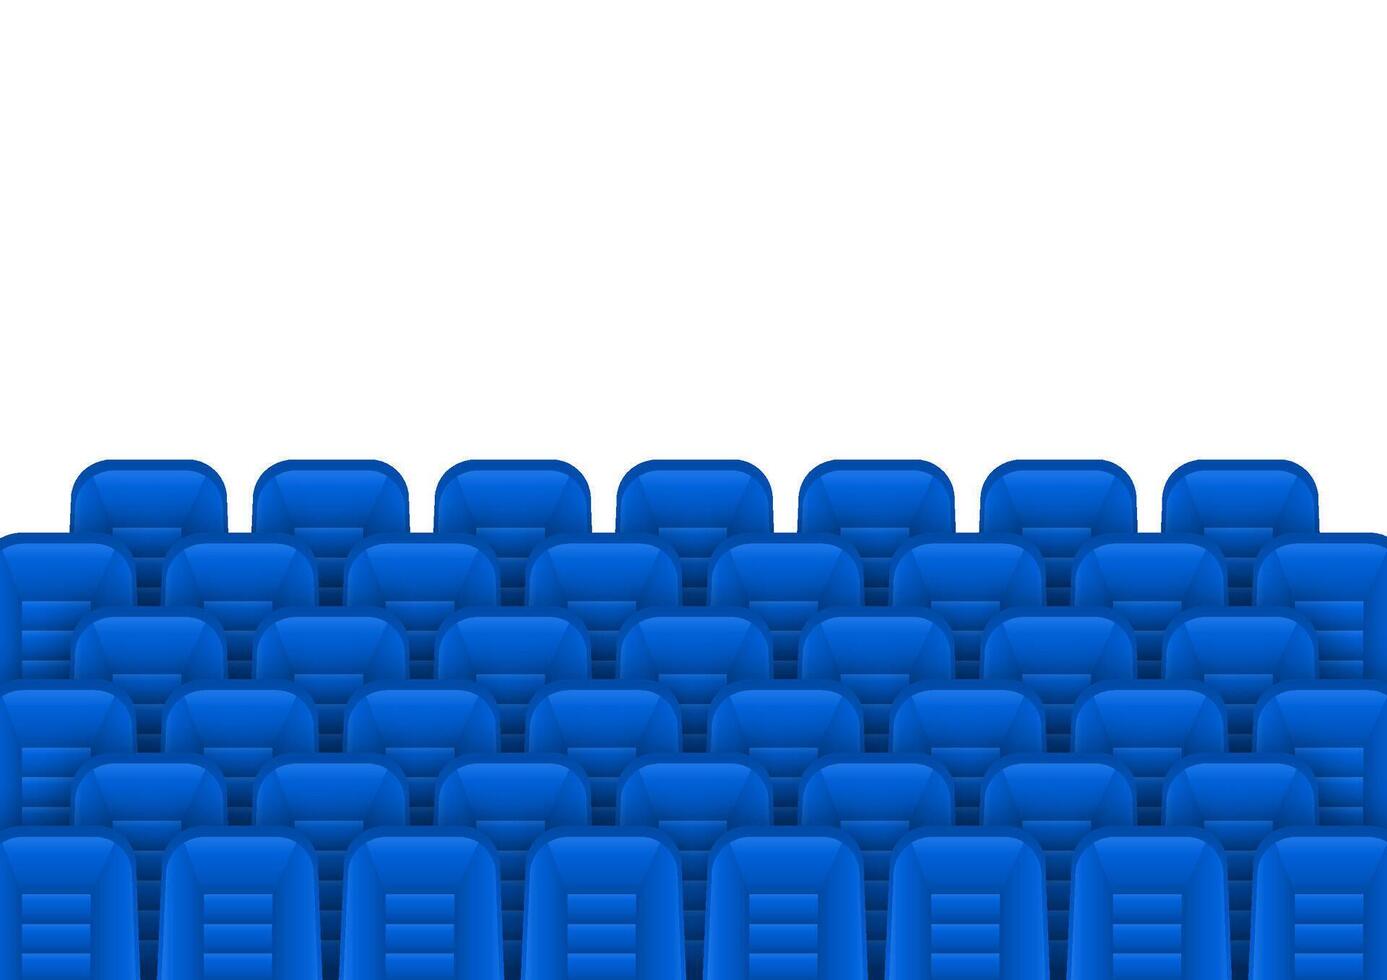 Blue movie theater seats for comfortable watching film. Cinema chair. Vector illustration